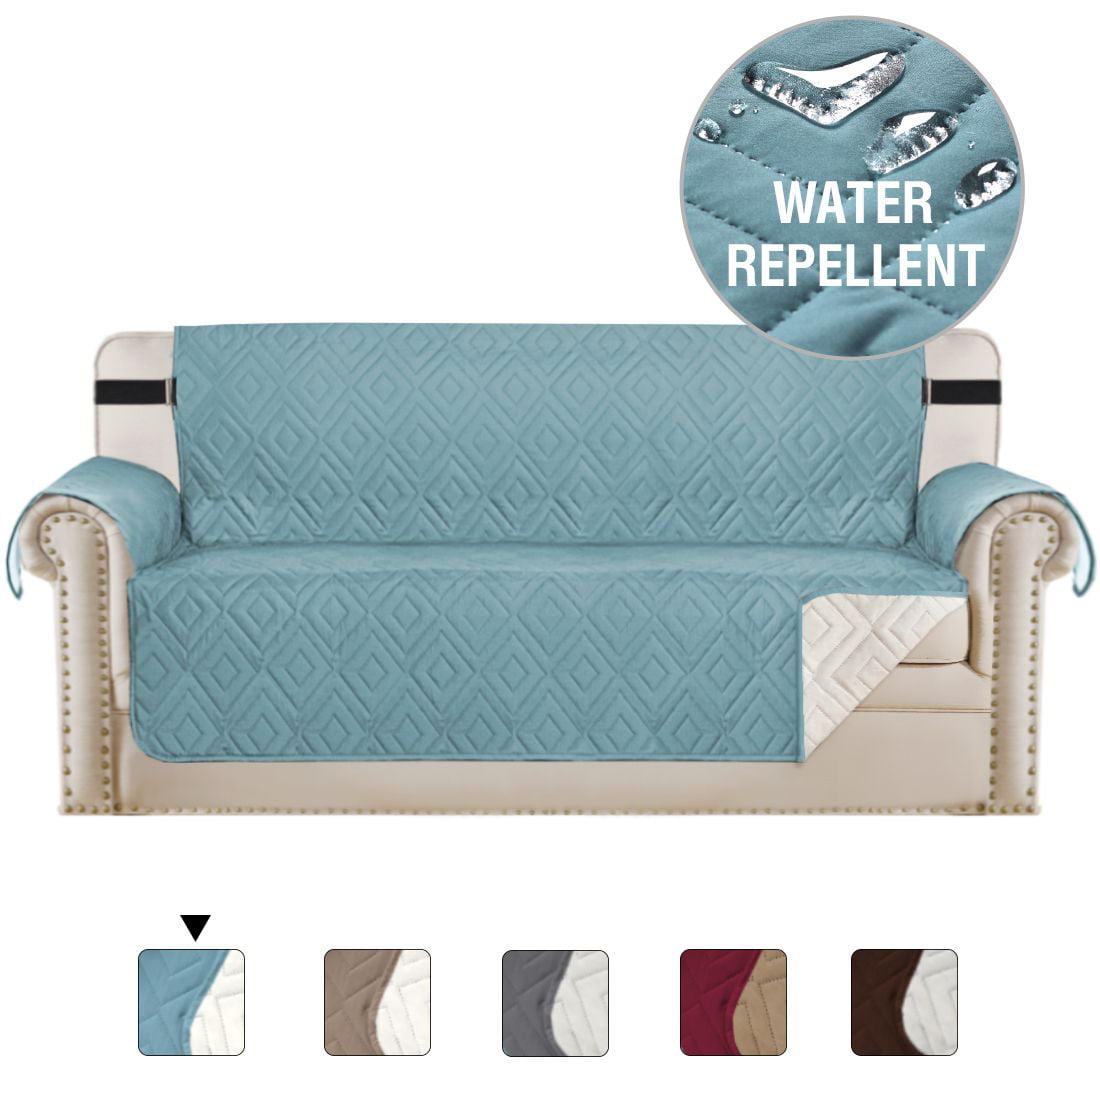 Details about   RHF Reversible Quilted Chair Recliner Cover Stylish Sofa Slipcover 11 Colors 